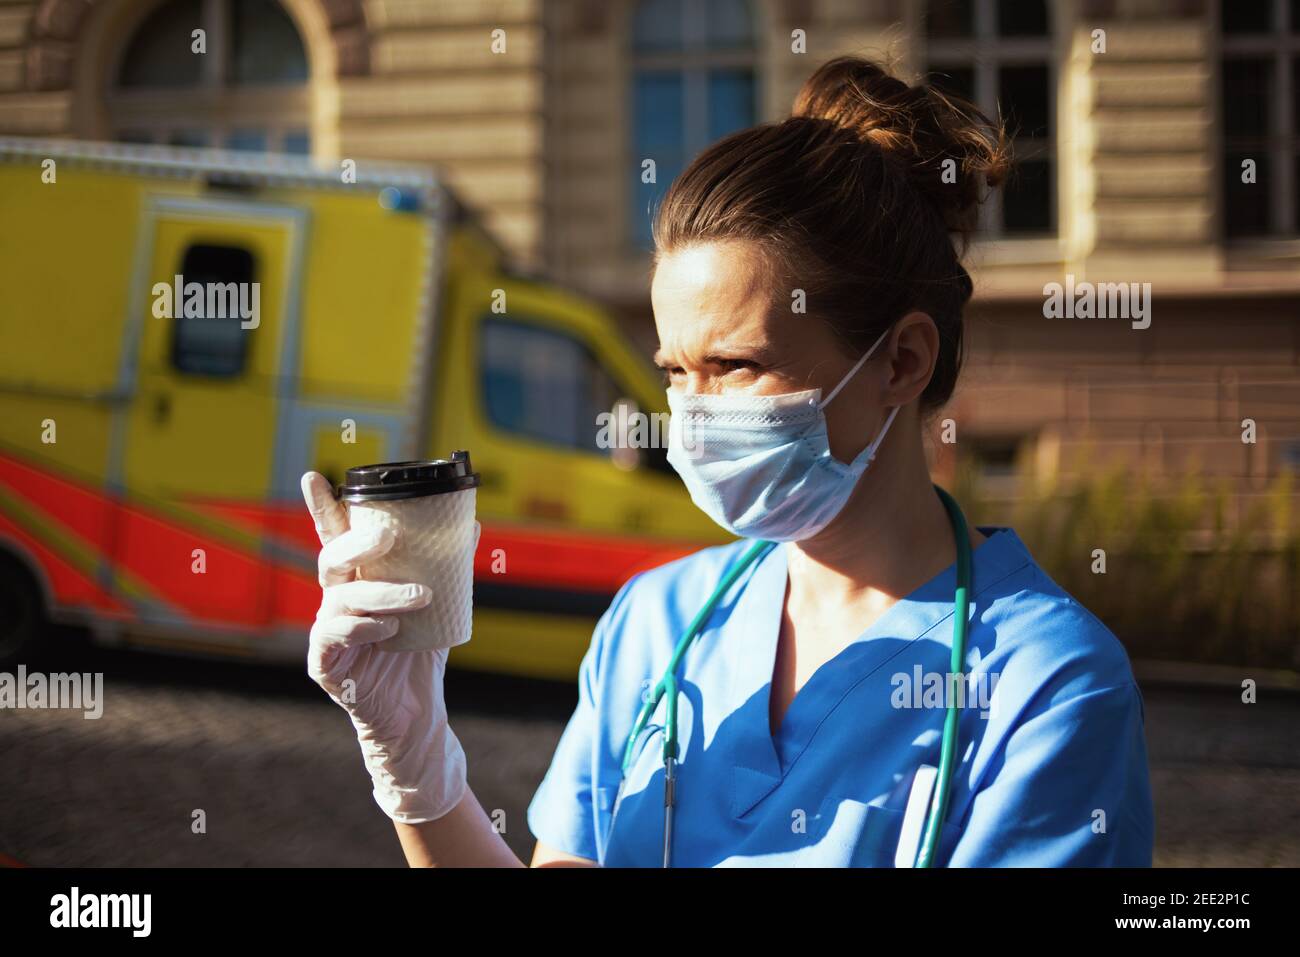 covid-19 pandemic. tired modern medical doctor woman in uniform with stethoscope, medical mask and cup of coffee outside near ambulance. Stock Photo